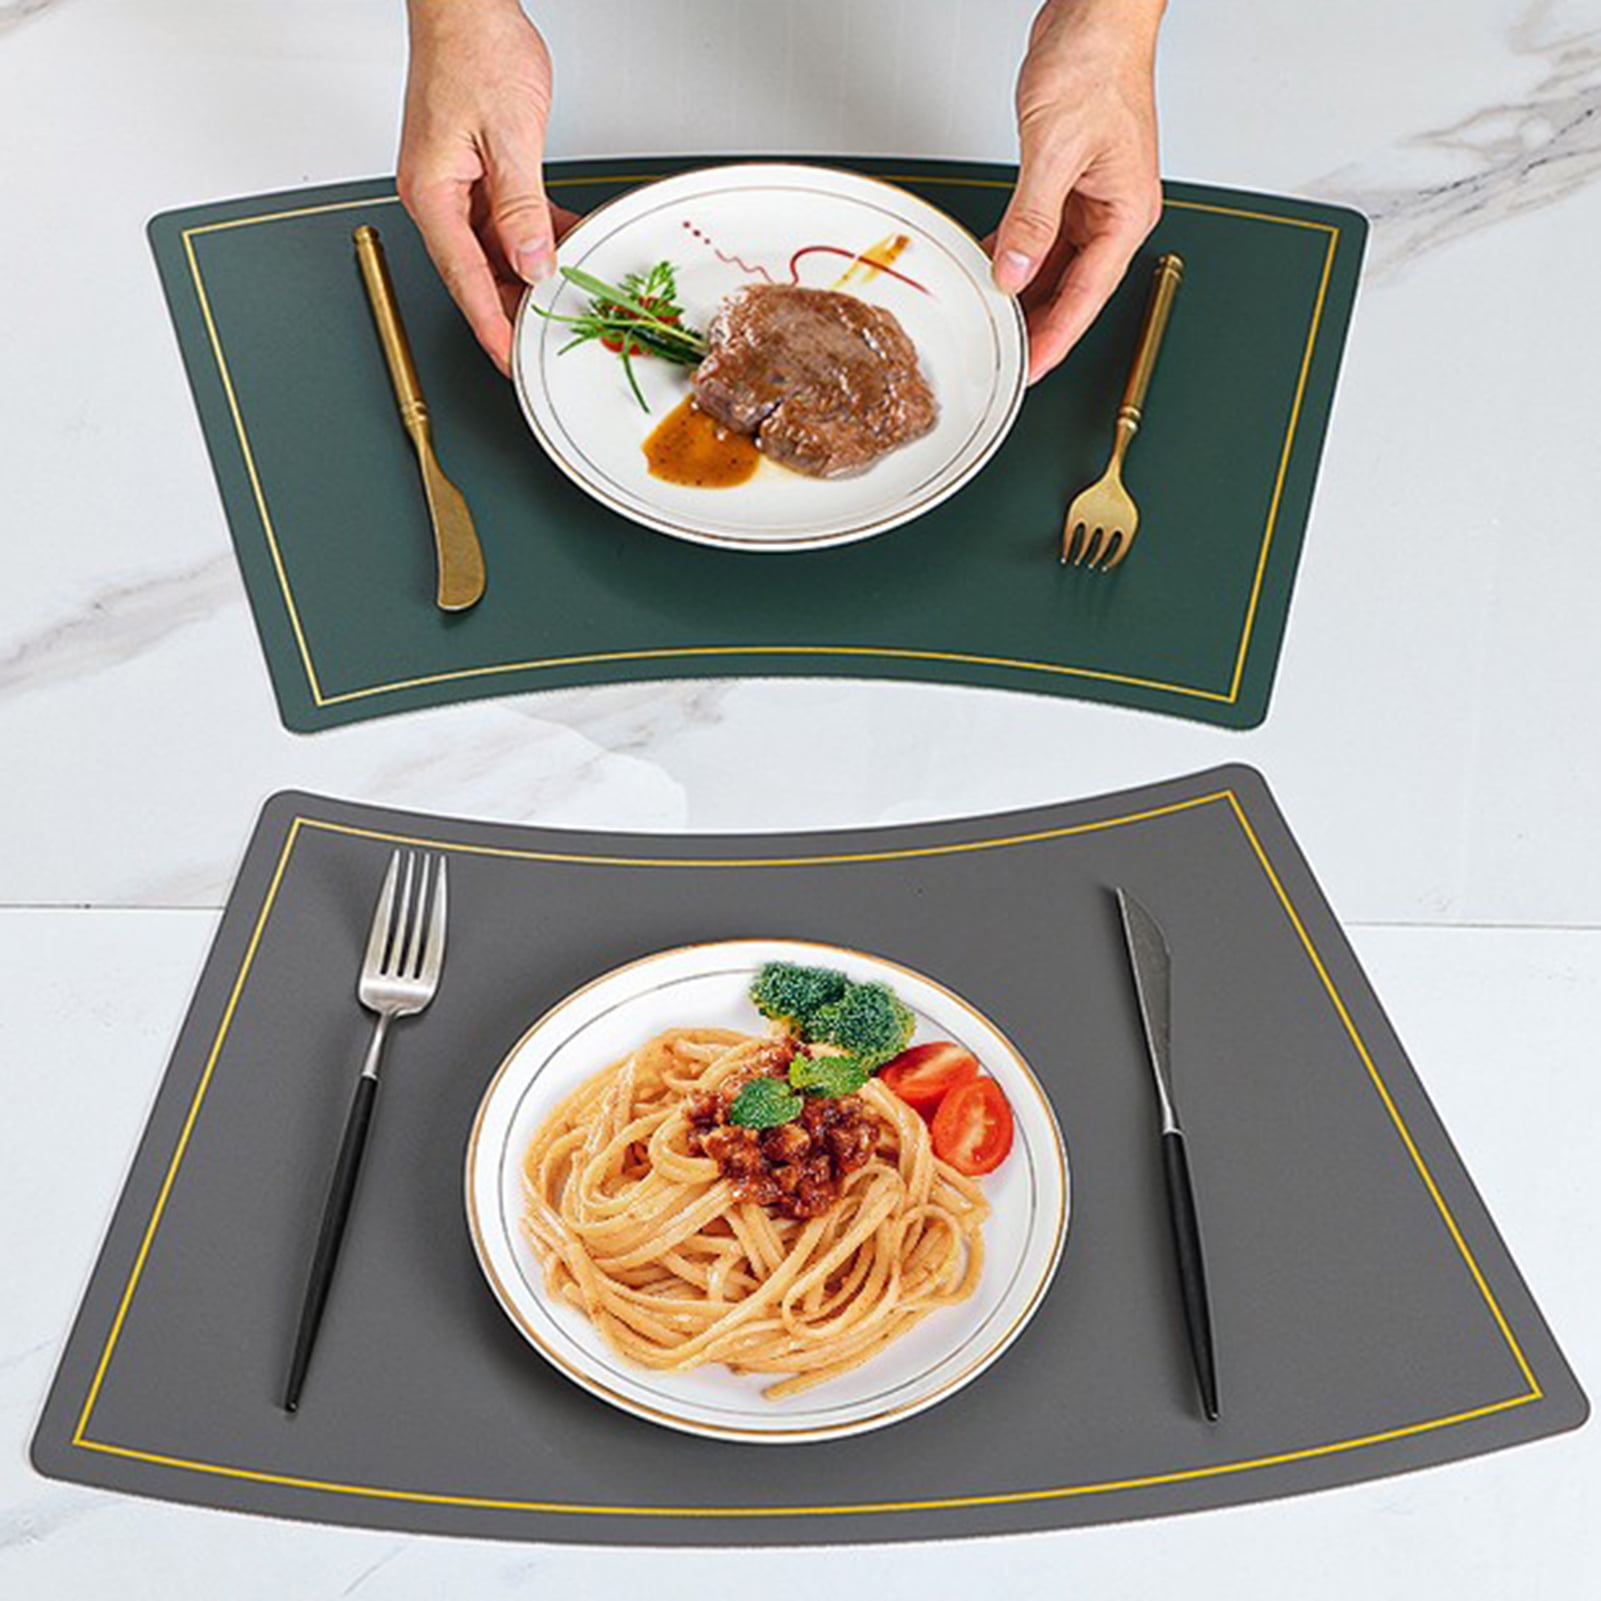 Amlbb Round Leather Placemat Solid Colour Faux Leather Placemats Coffee Mats Kitchen Table Mats Waterproof Easy to Clean Kitchen Table Mats on